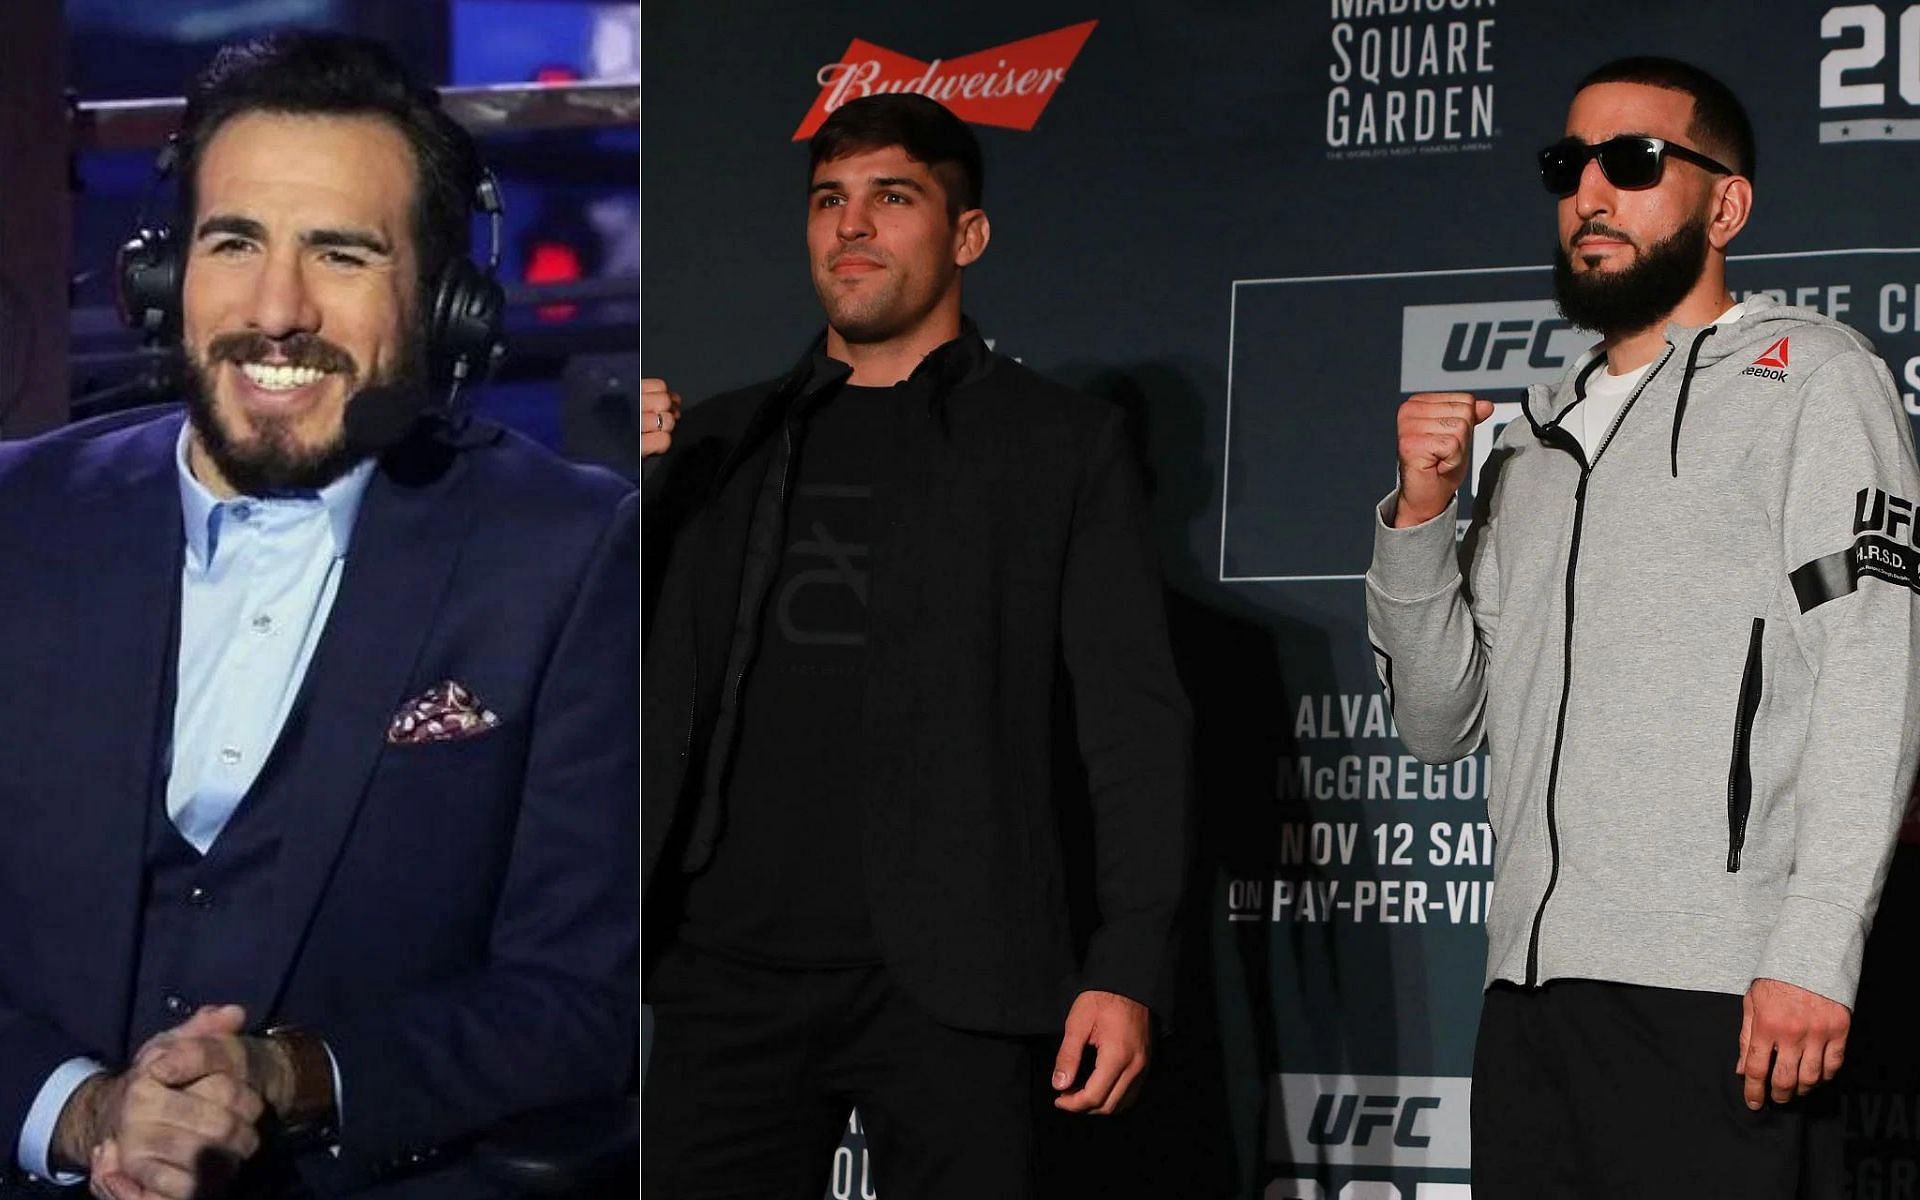 Kenny Florian (left) and Vicente Luque &amp; Belal Muhammad (right) [Image credits: @kennyflorian on Instagram]